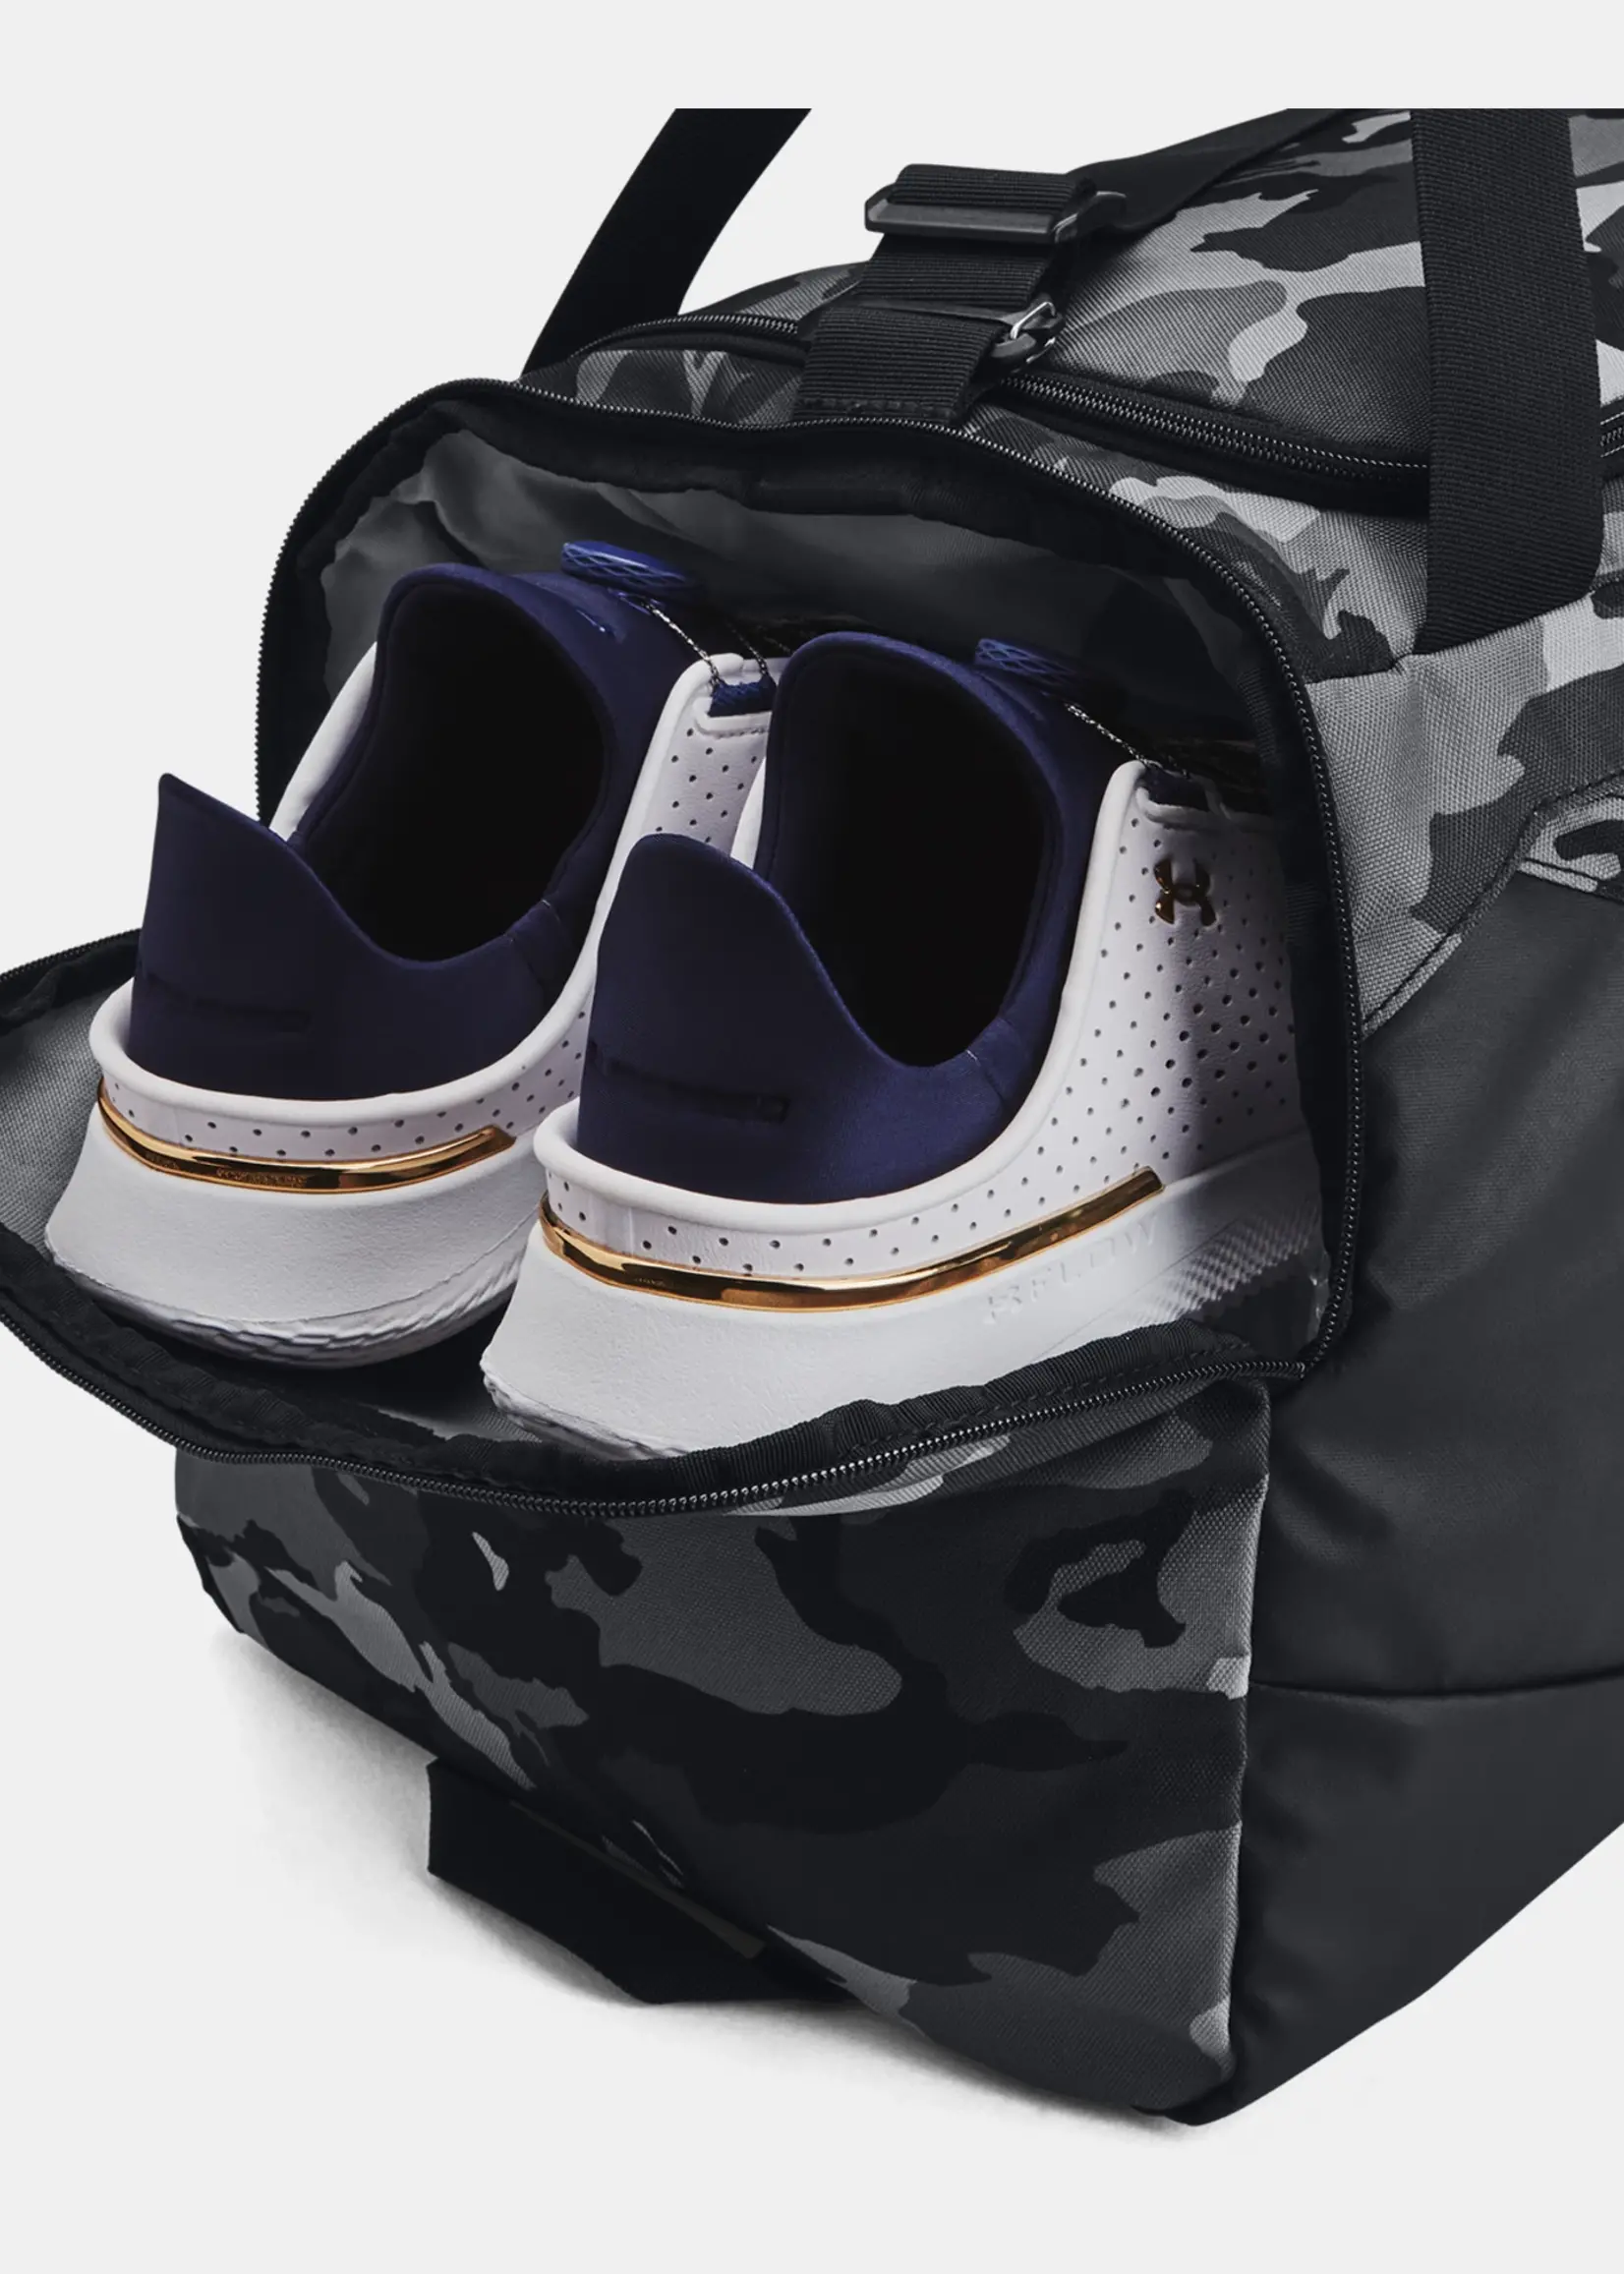 Under Armour UA UNDENIABLE 5.0 DUFFLE MD 1369223